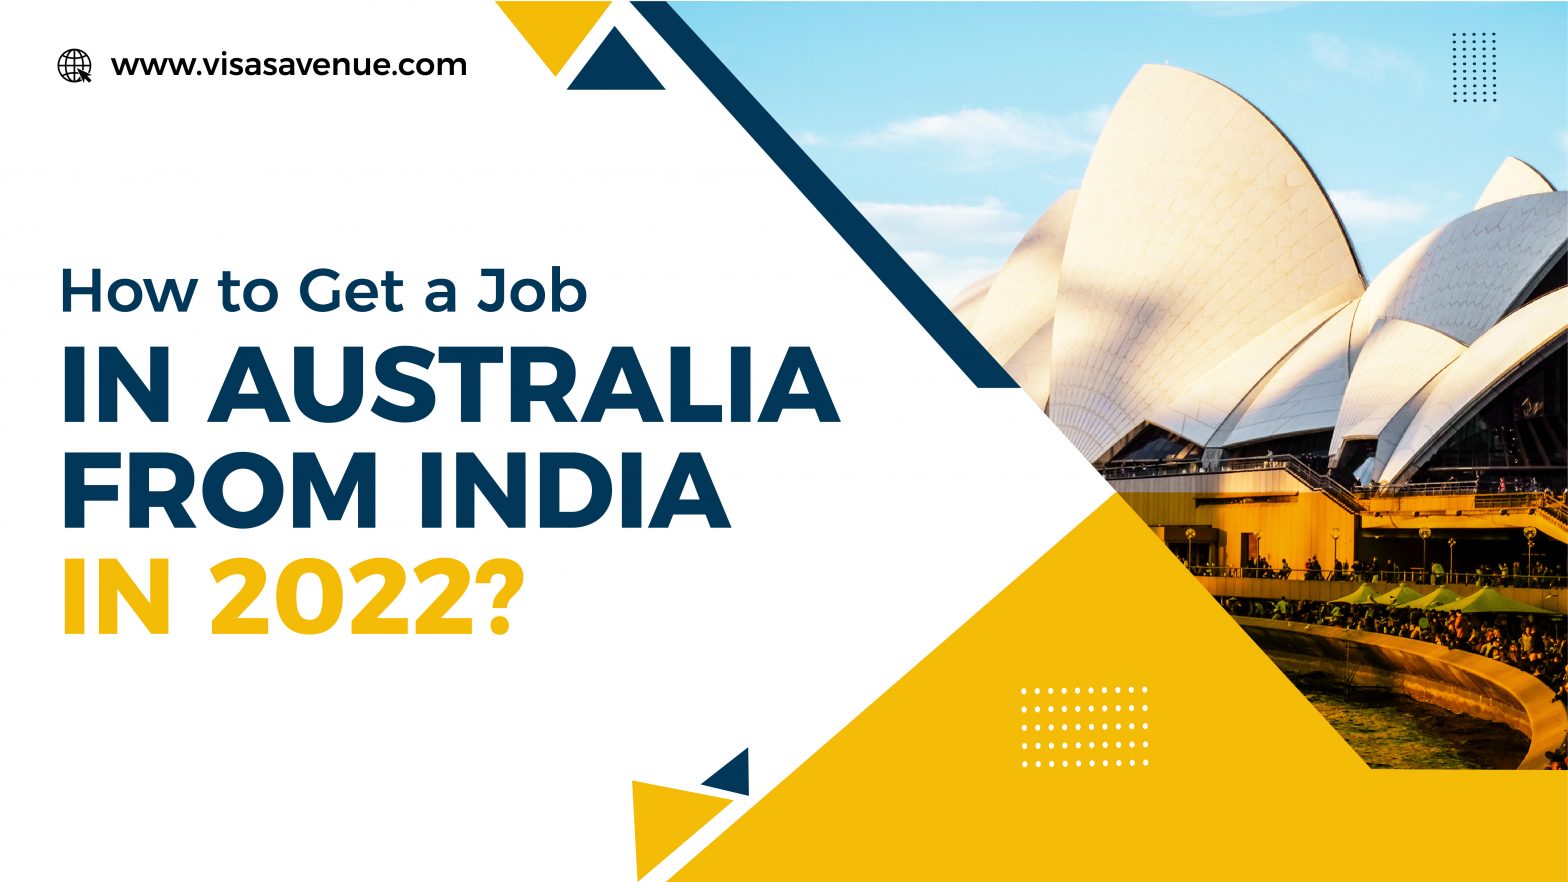 How to Get a Job in Australia from India in 2022